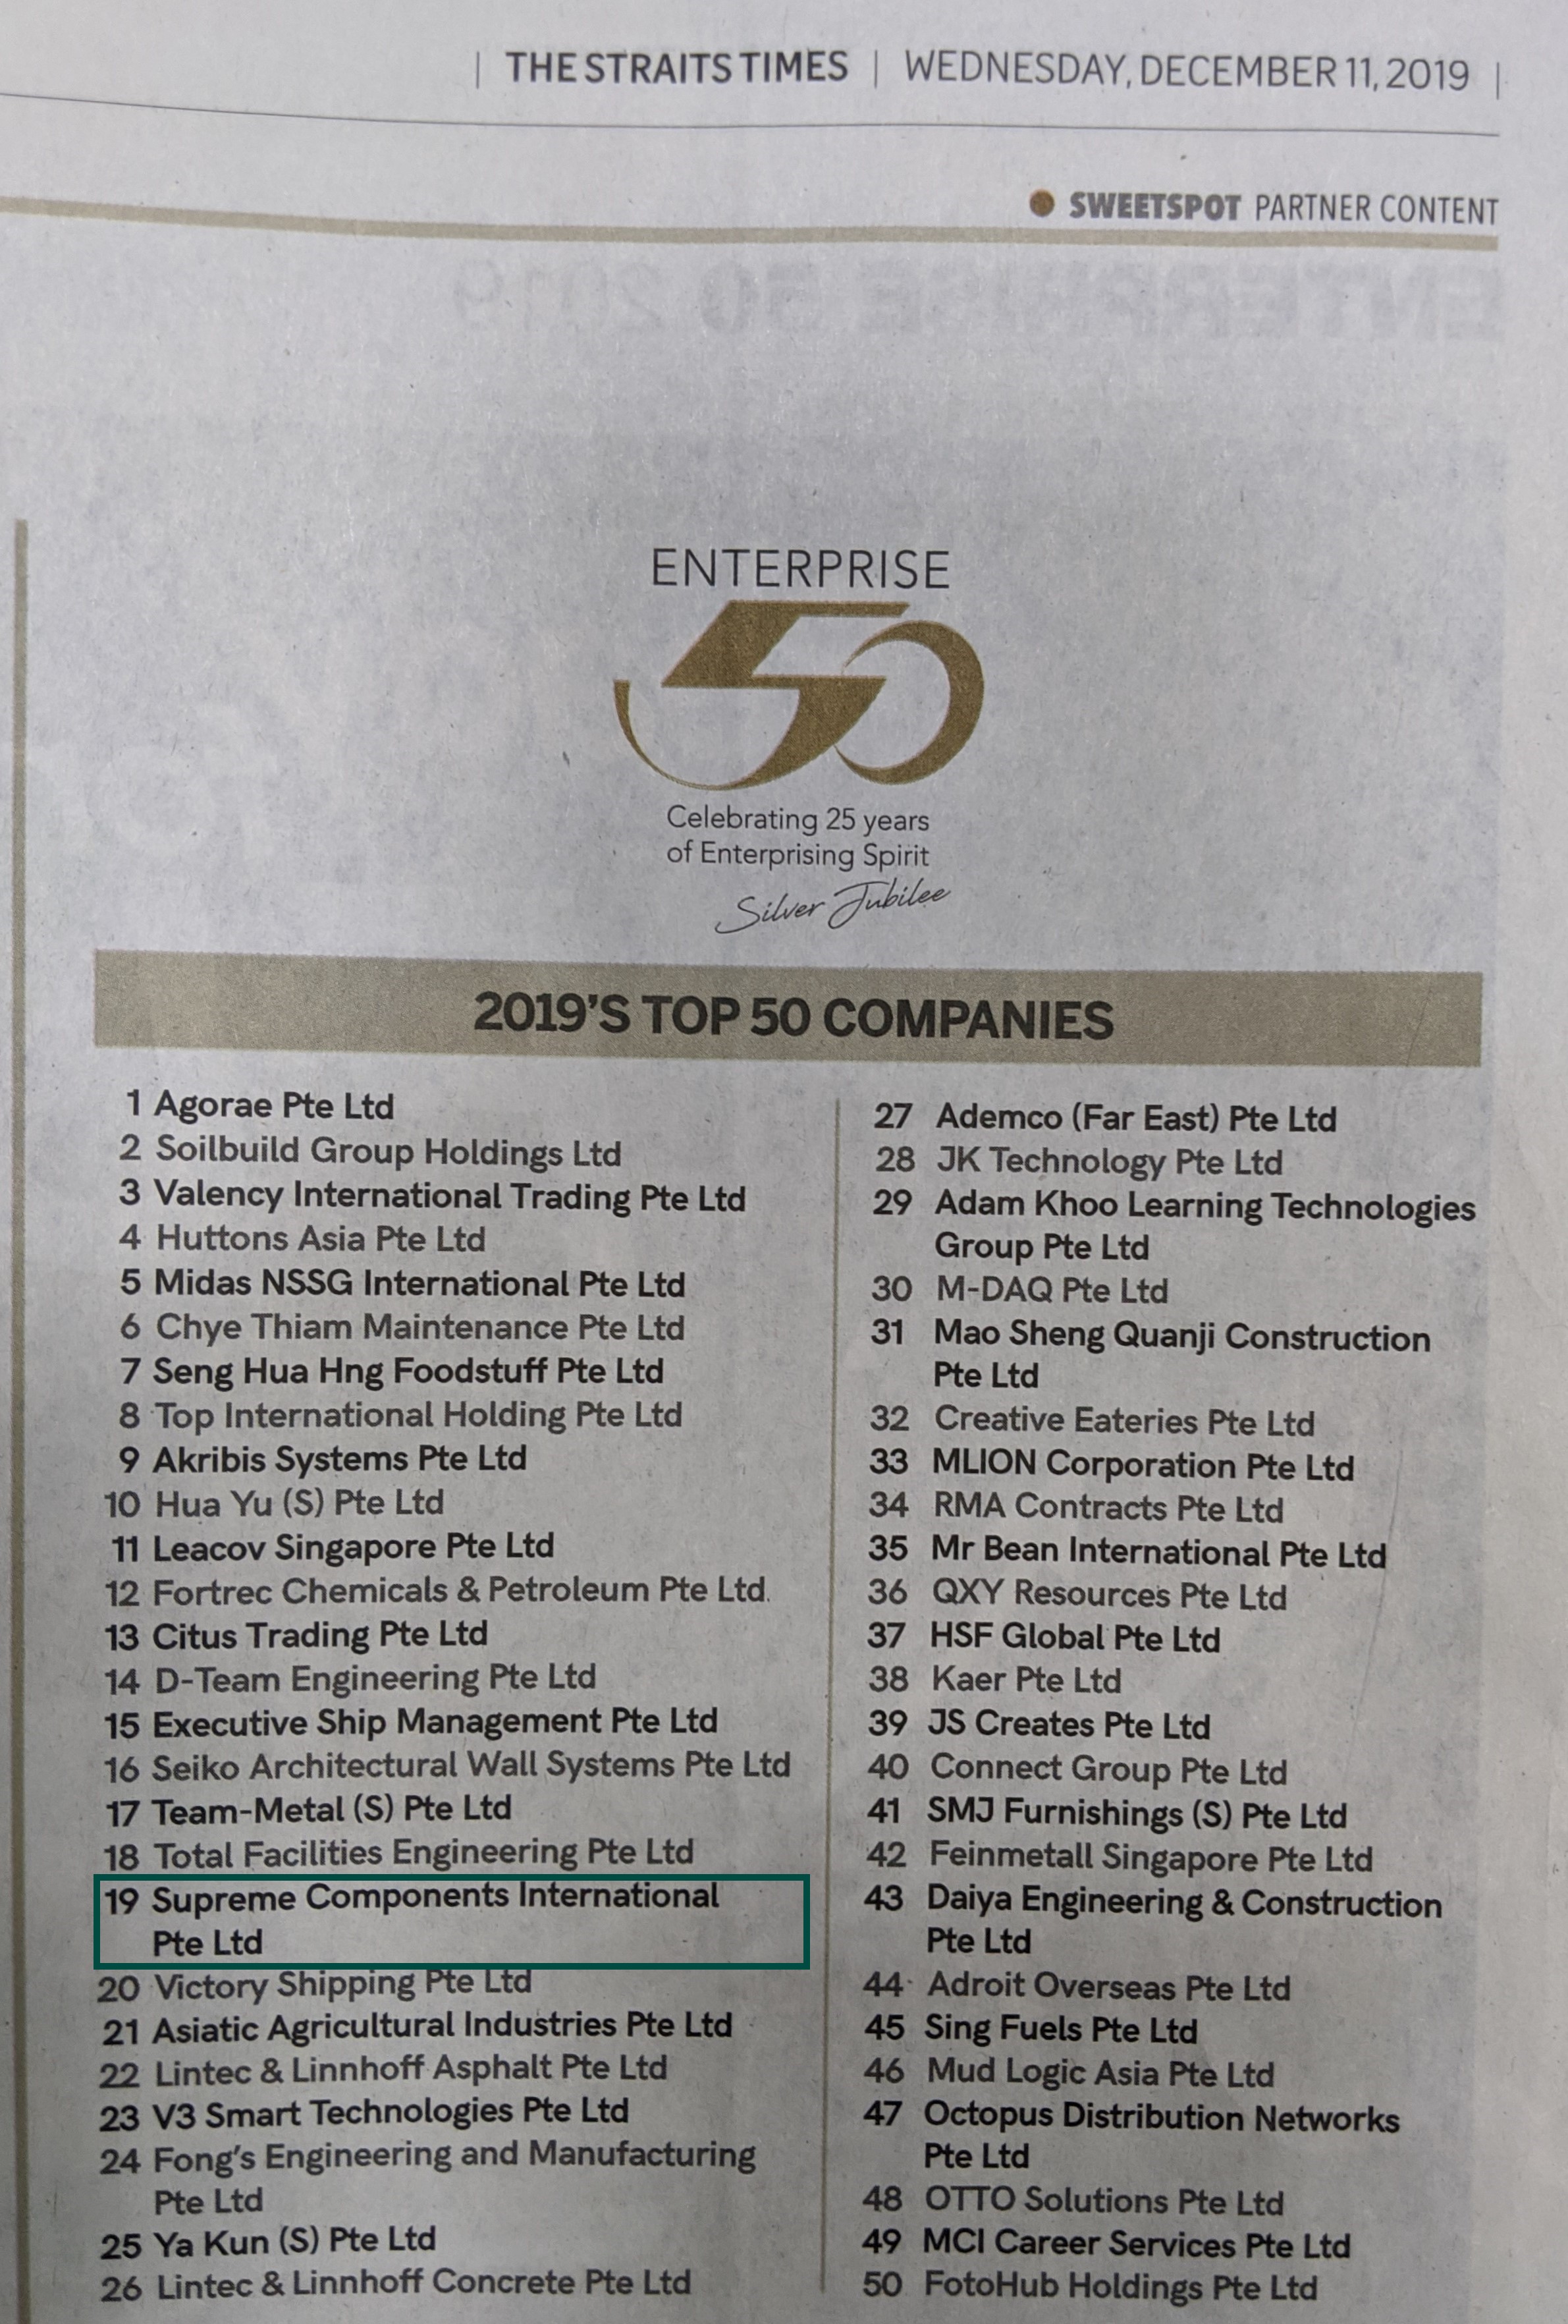 The Straits Times 2019’s Top 50 Companies – SCI at 19 